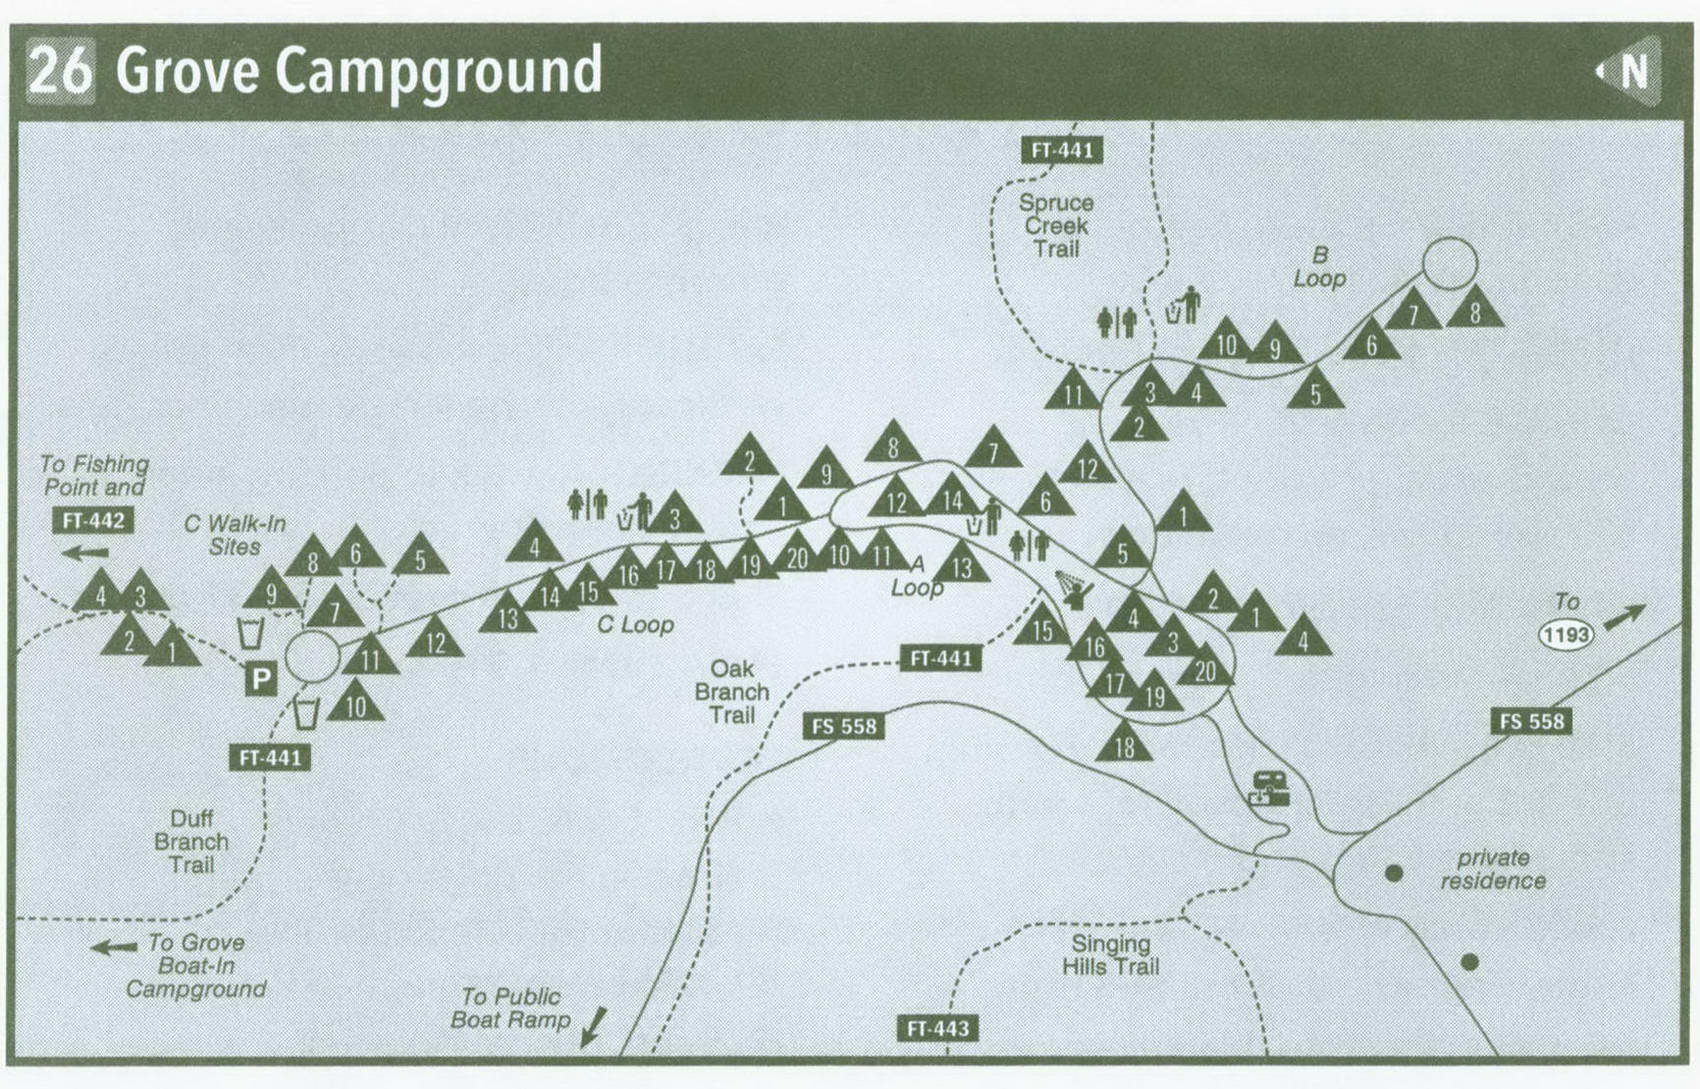 Plan of Grove Campground